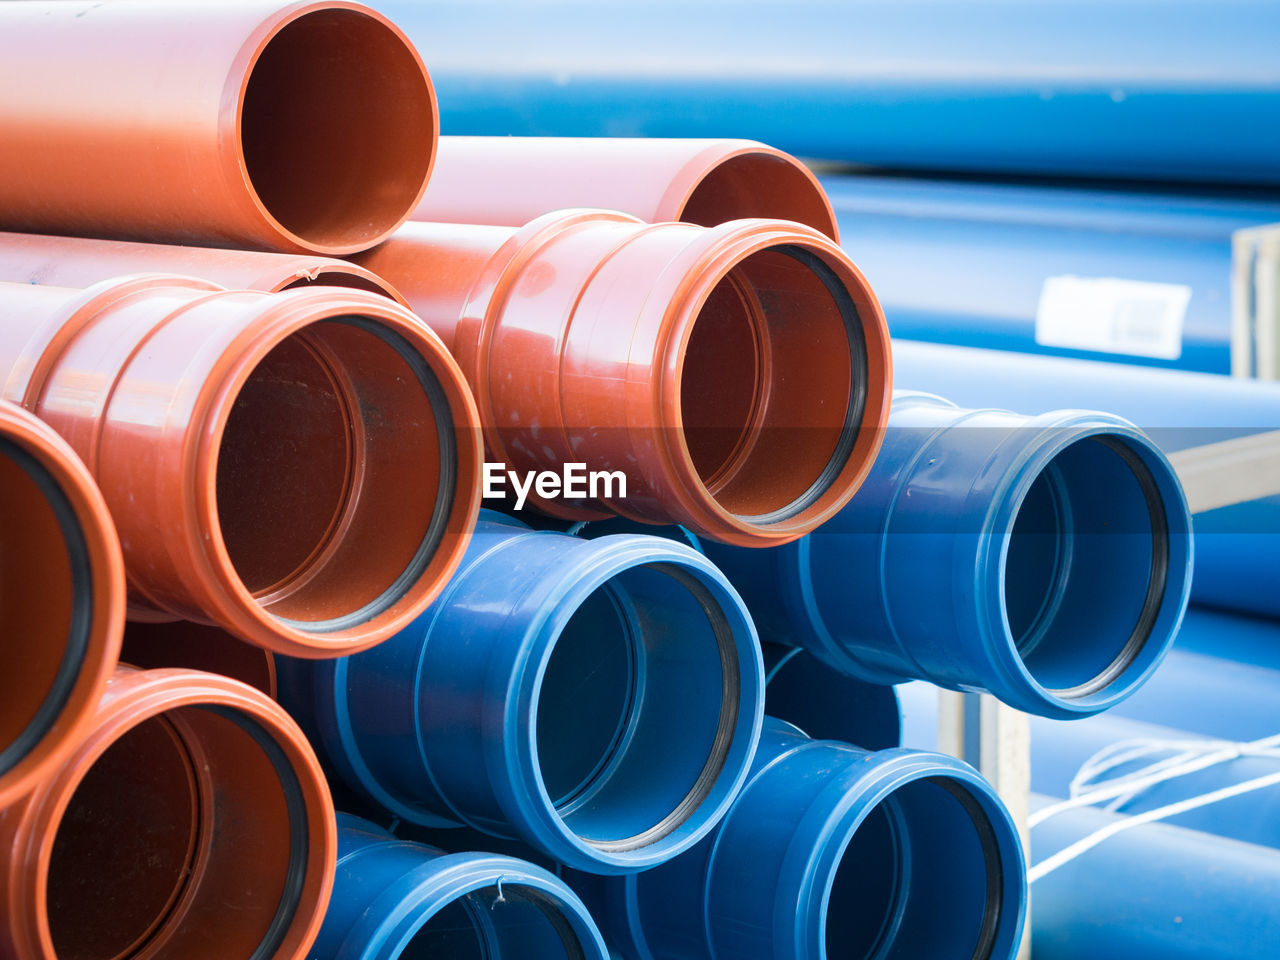 Close-up of stack of blue and brown plastic pipes 